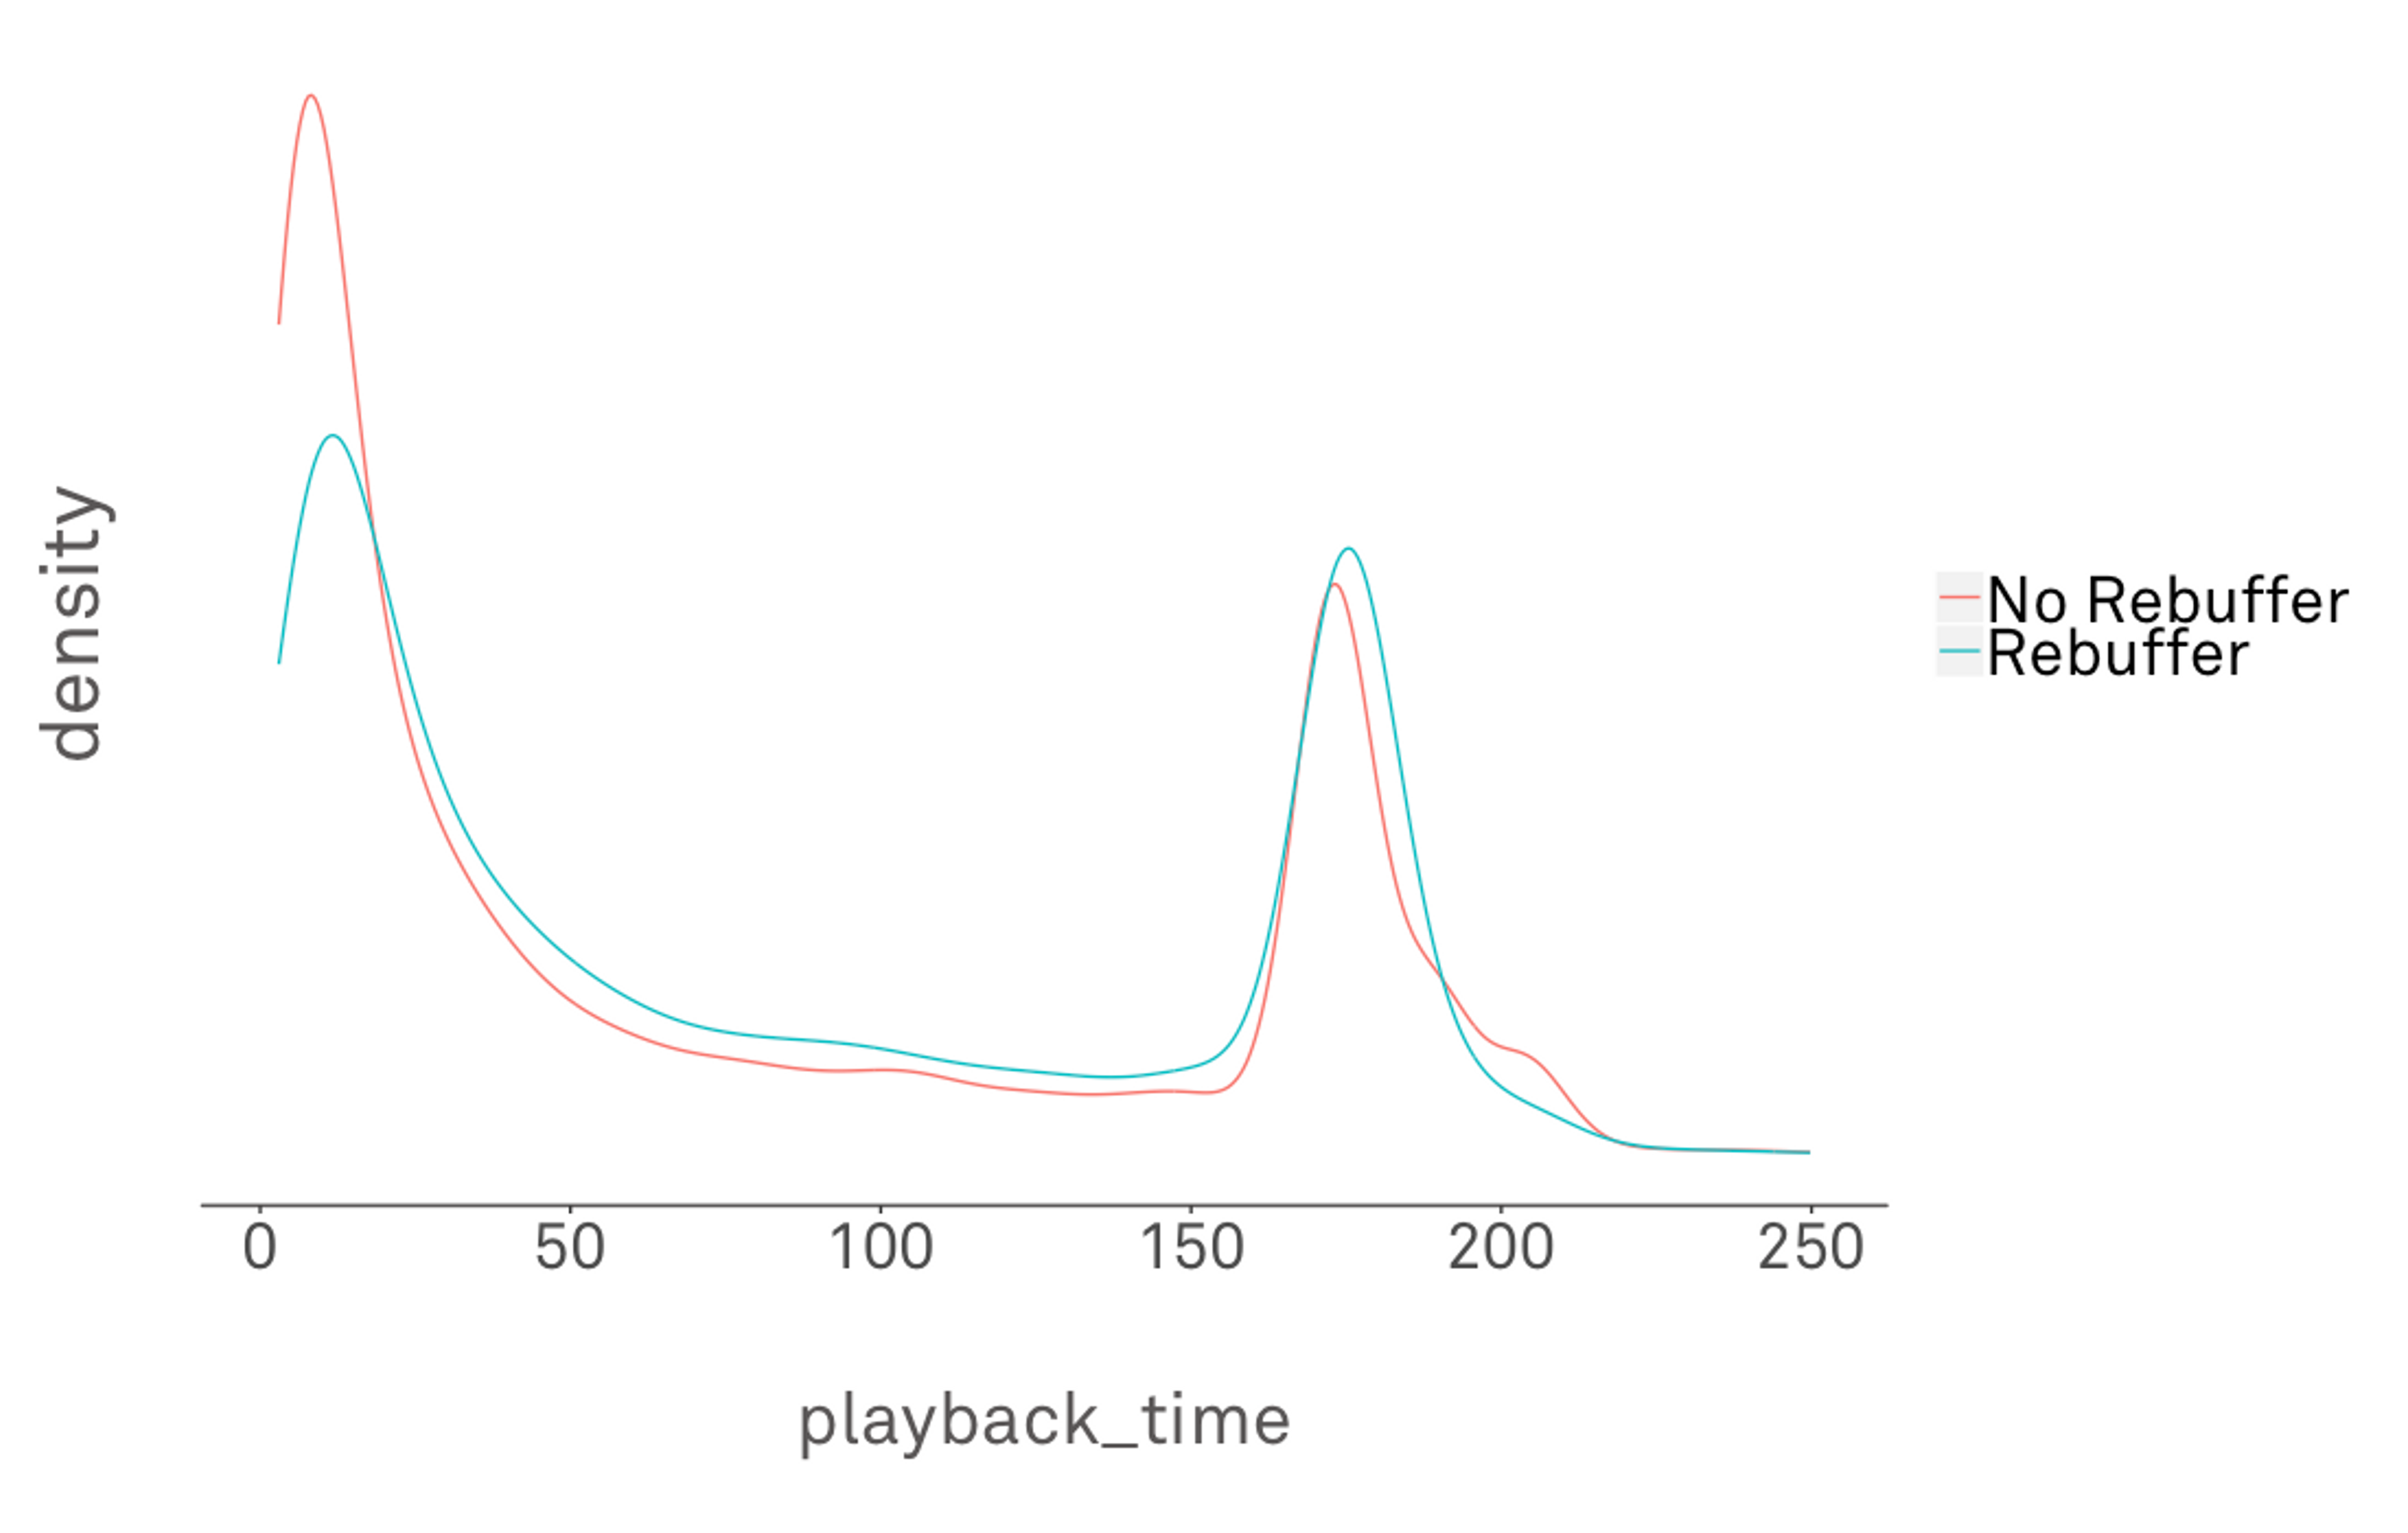 A graph showing playback time